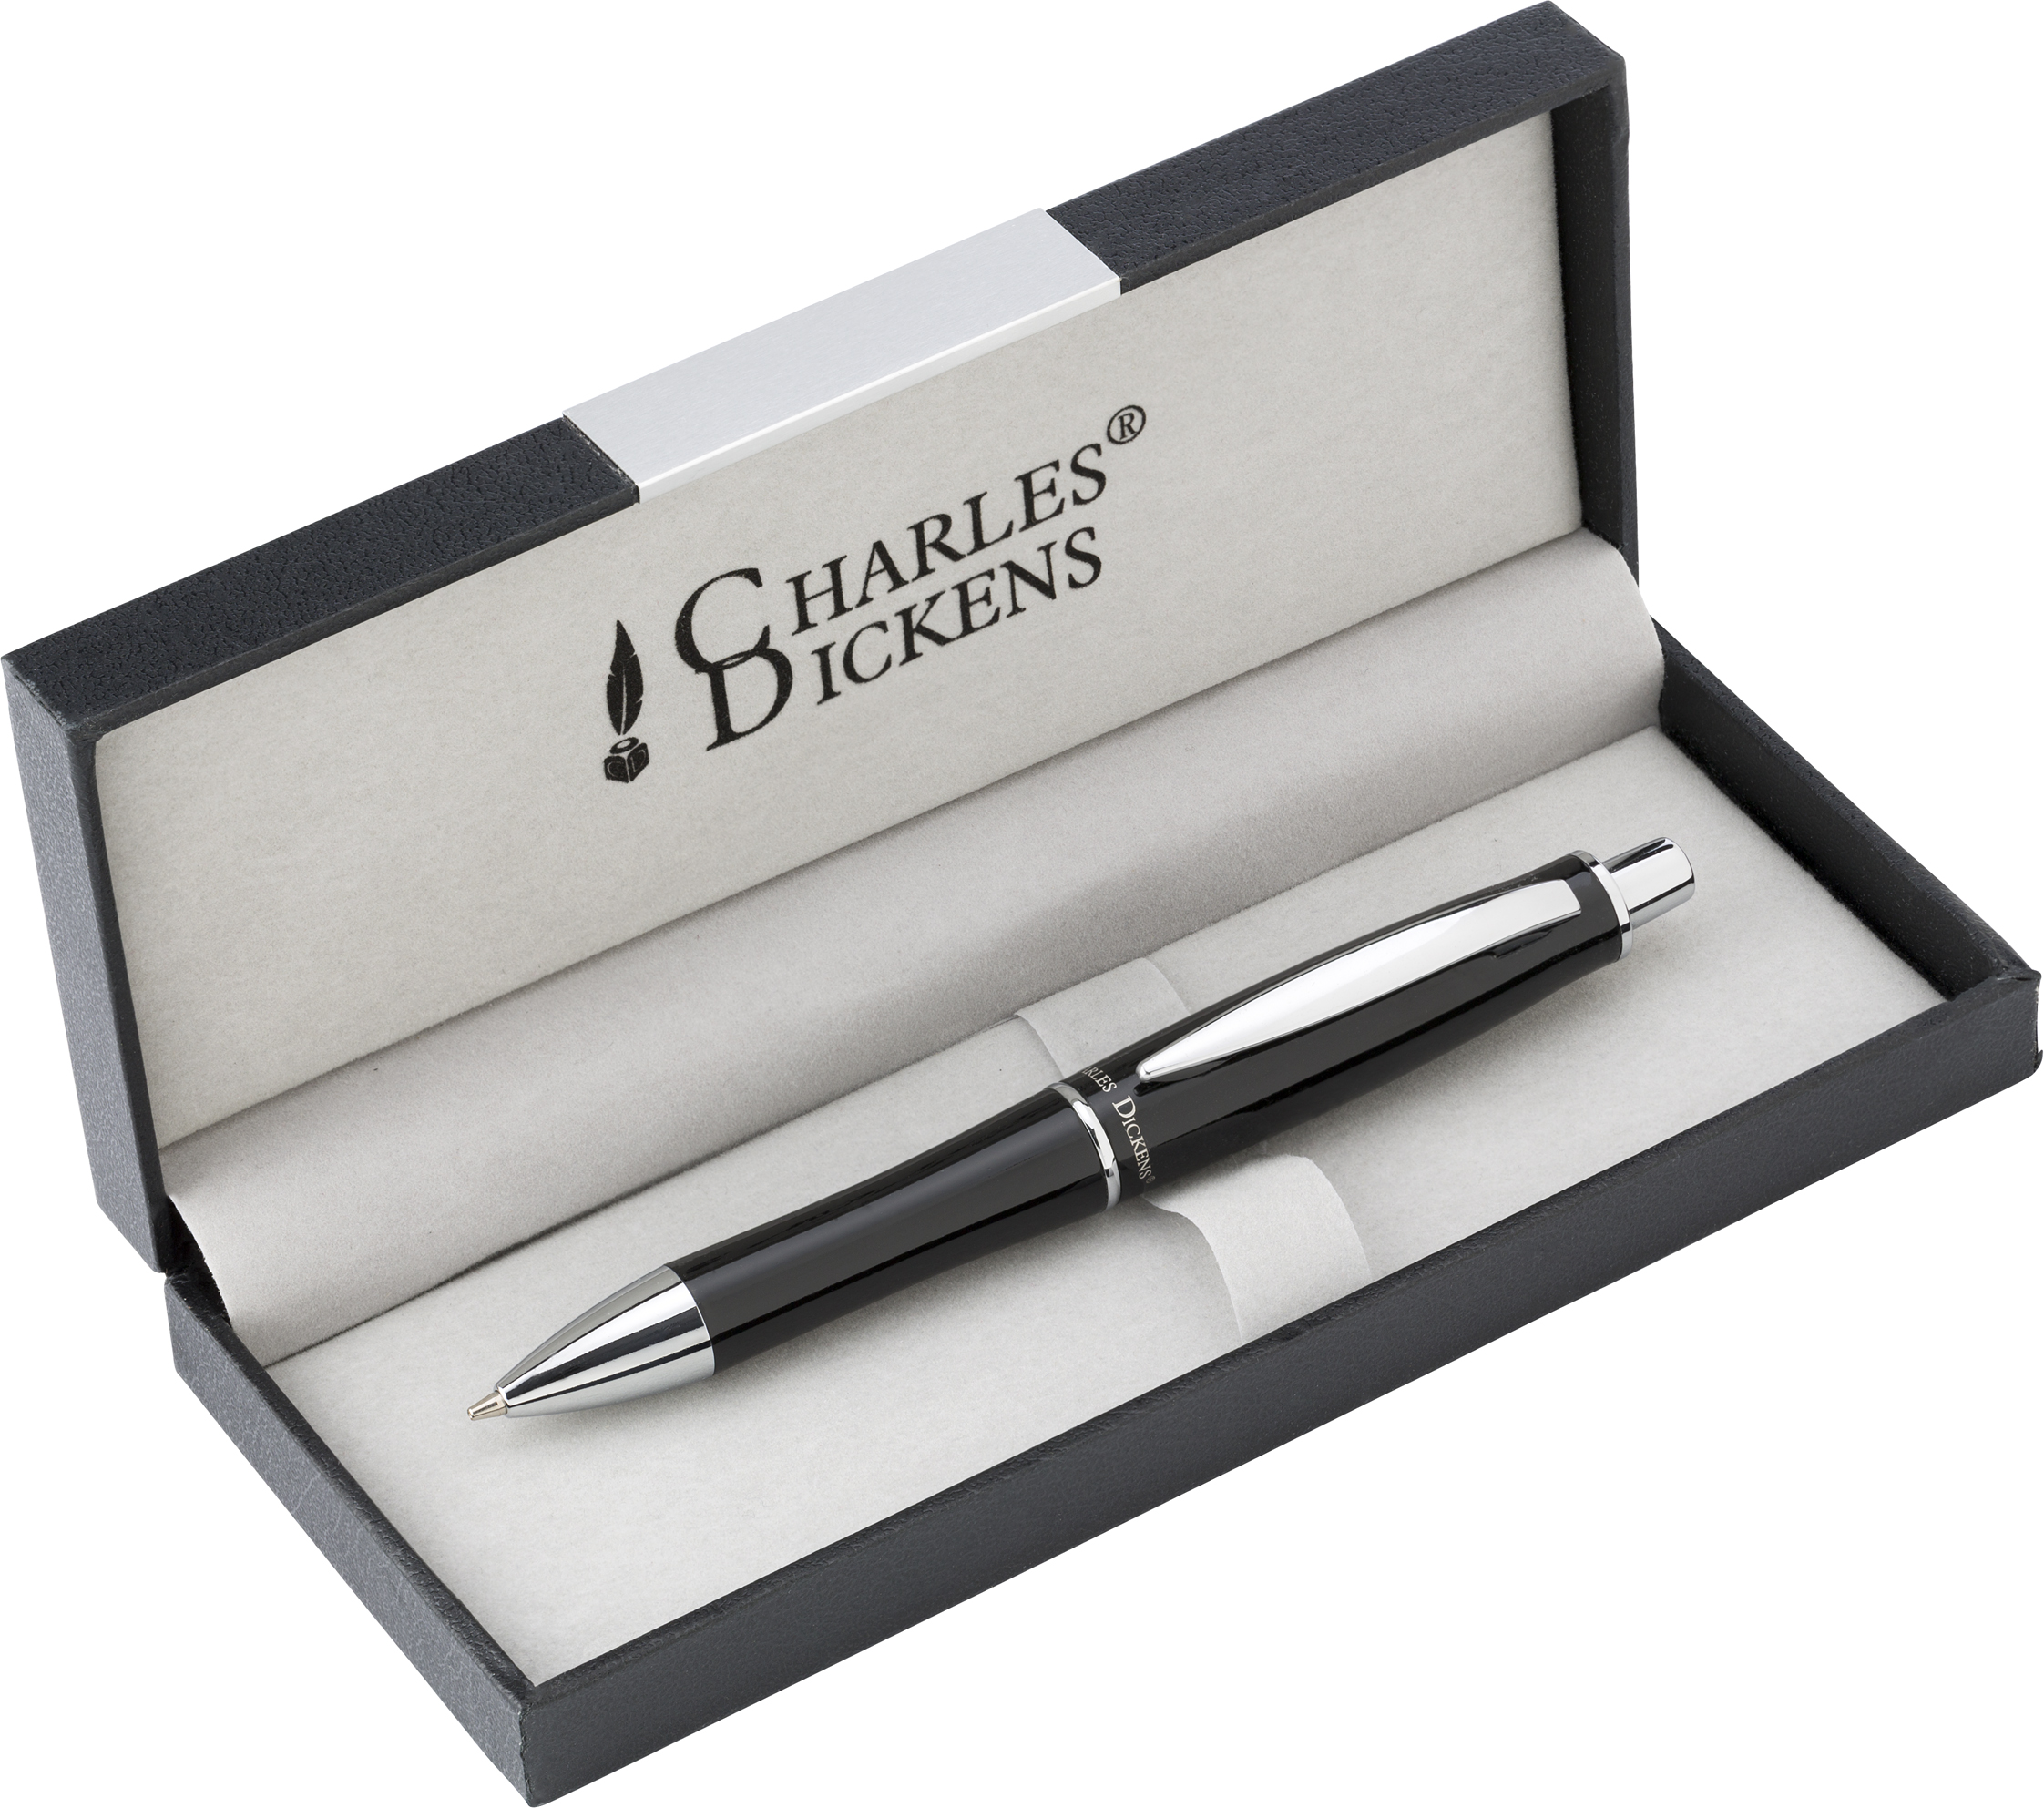 Promotional Charles Dickens mechanical pencil.